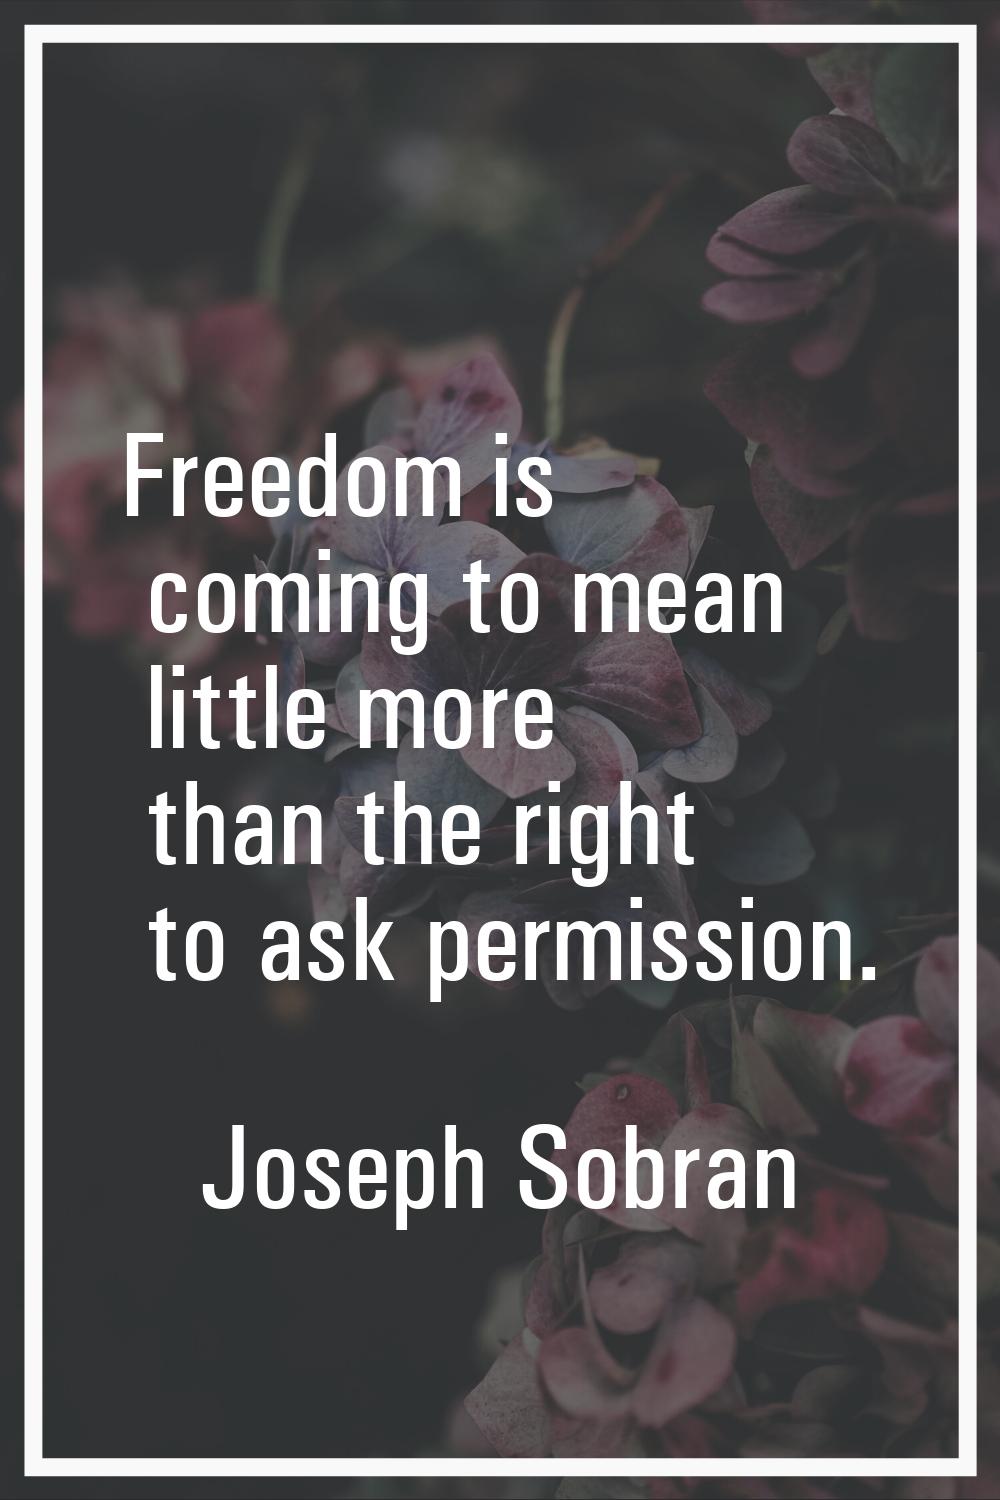 Freedom is coming to mean little more than the right to ask permission.